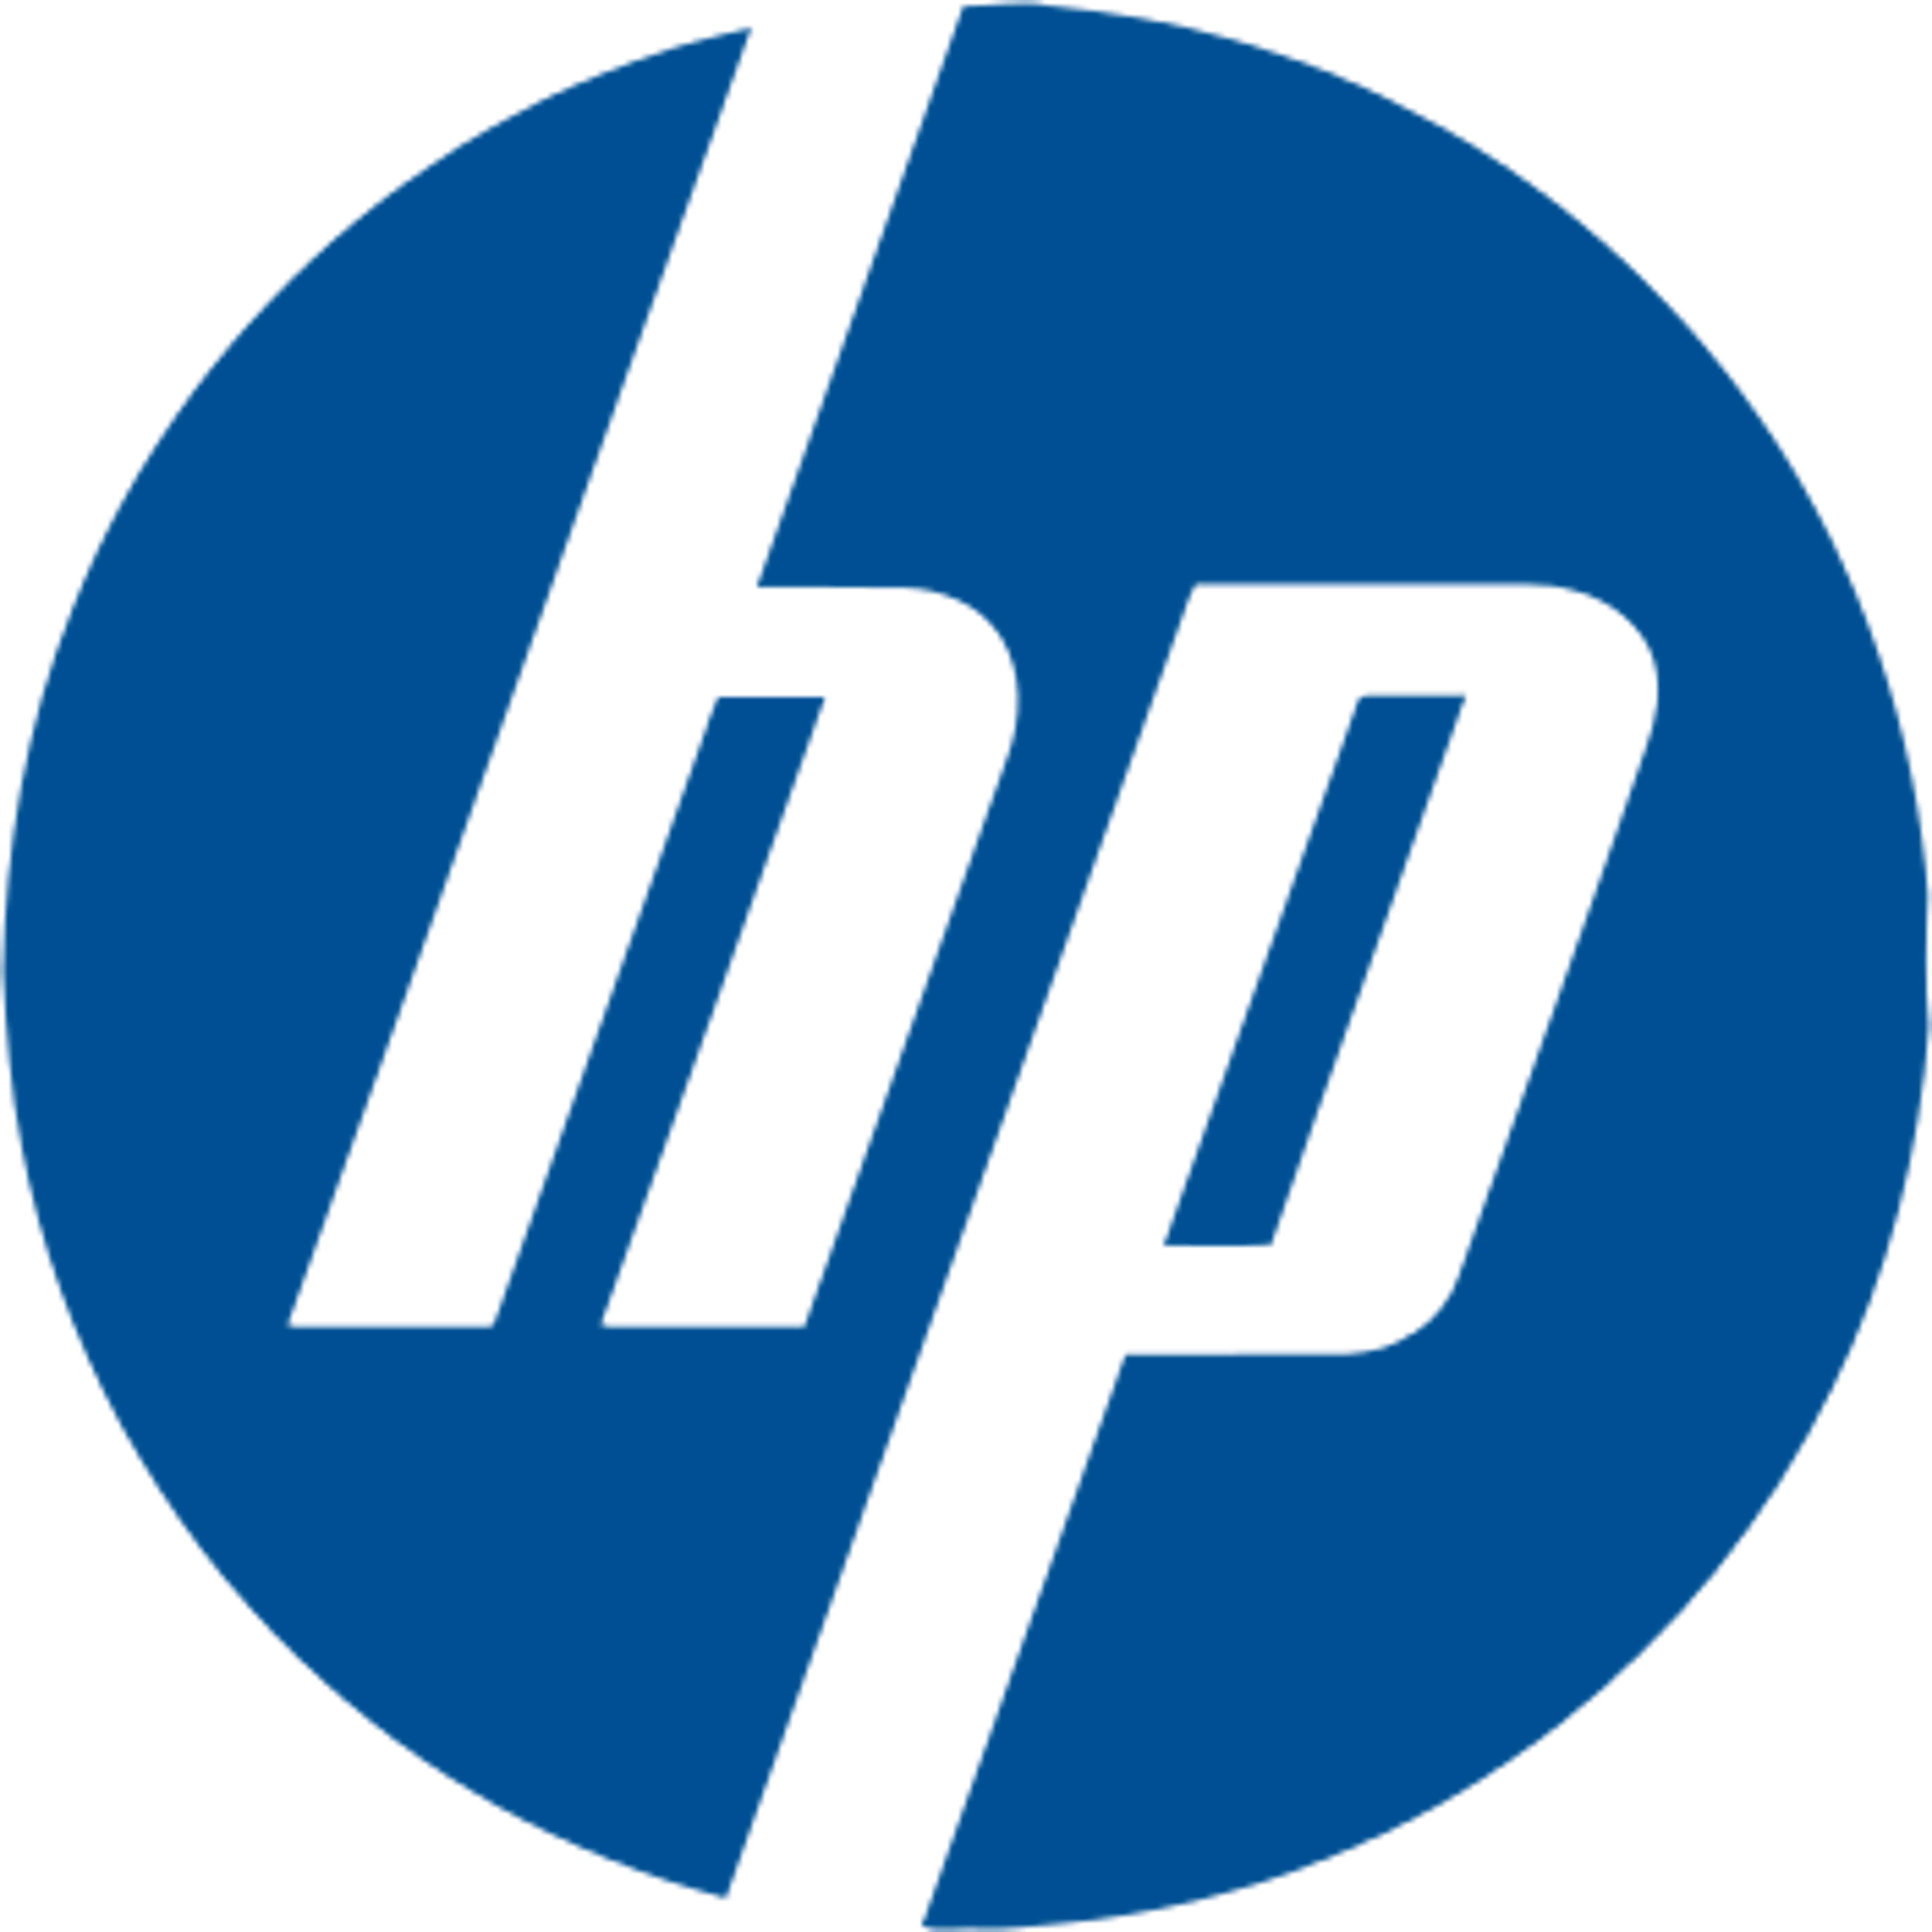 HP, Jabil And This Industrial Stock Insiders Are Selling